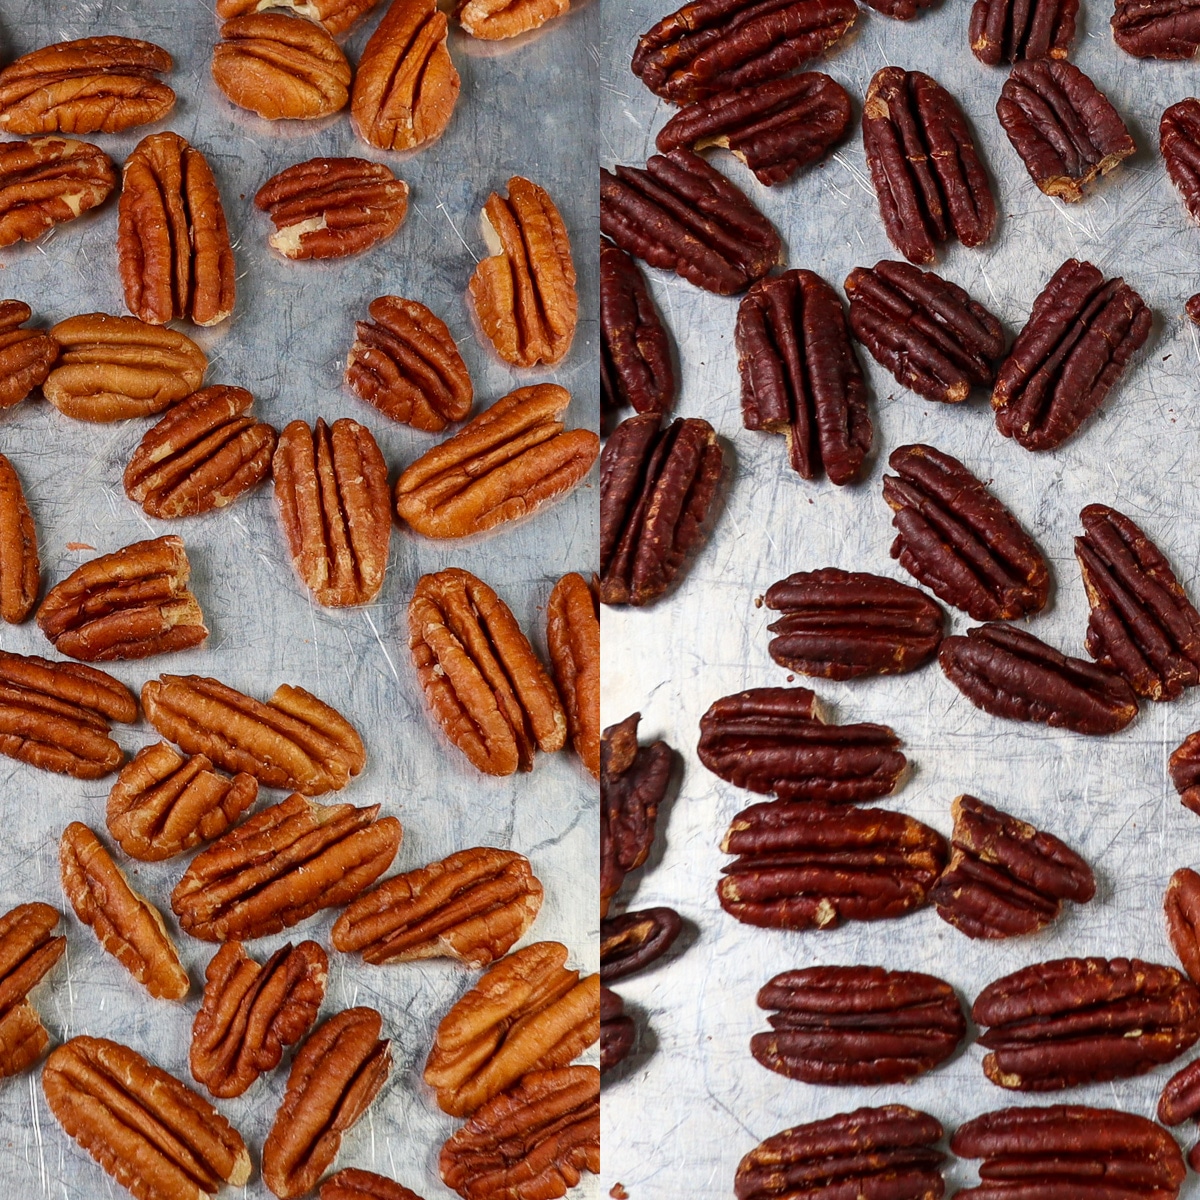 raw and toasted pecans compared